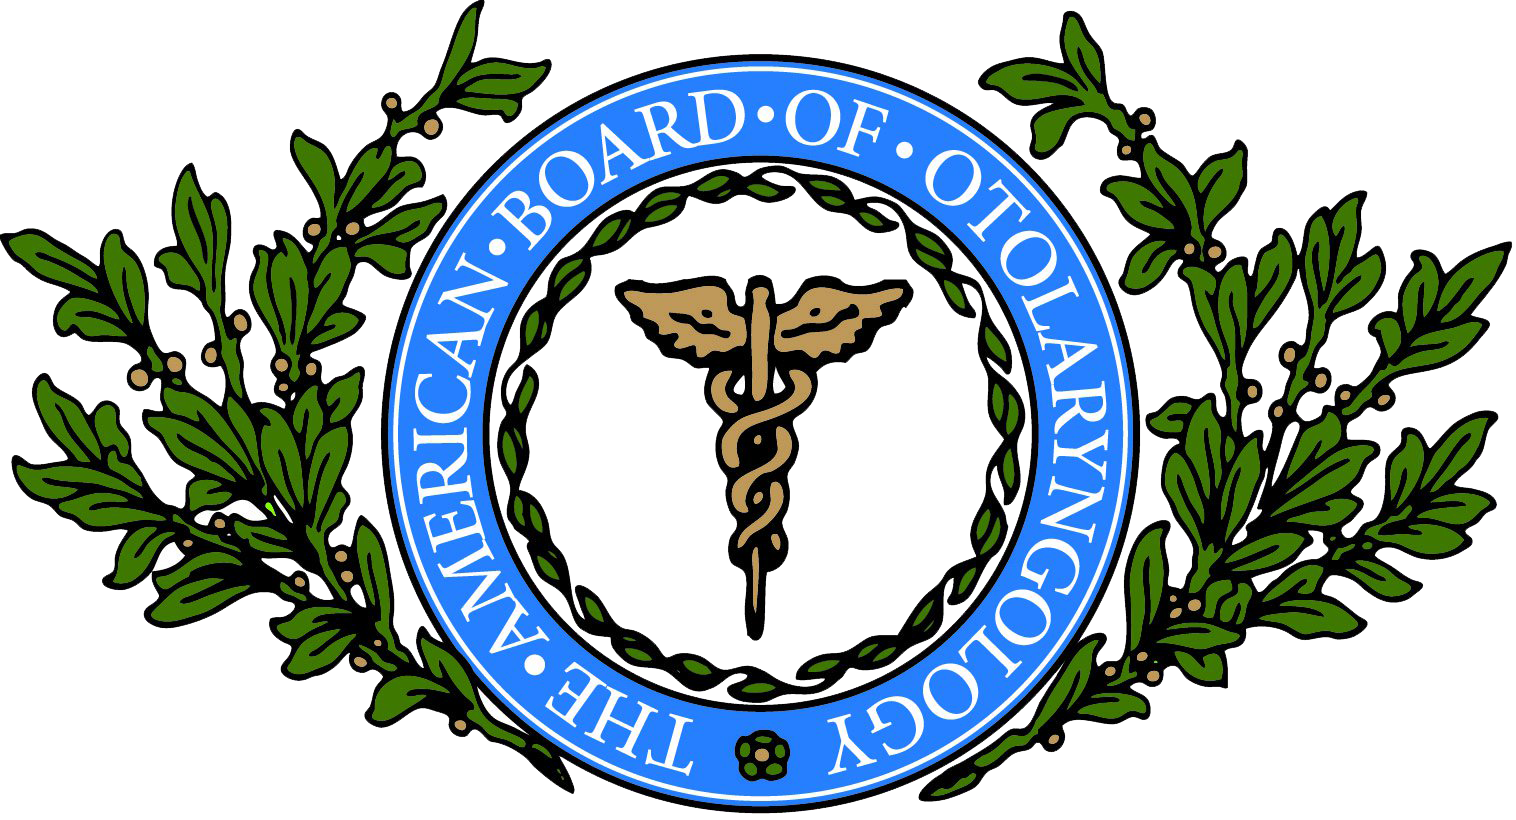 American Board of Otolaryngology - Head and Neck Surgery (1)